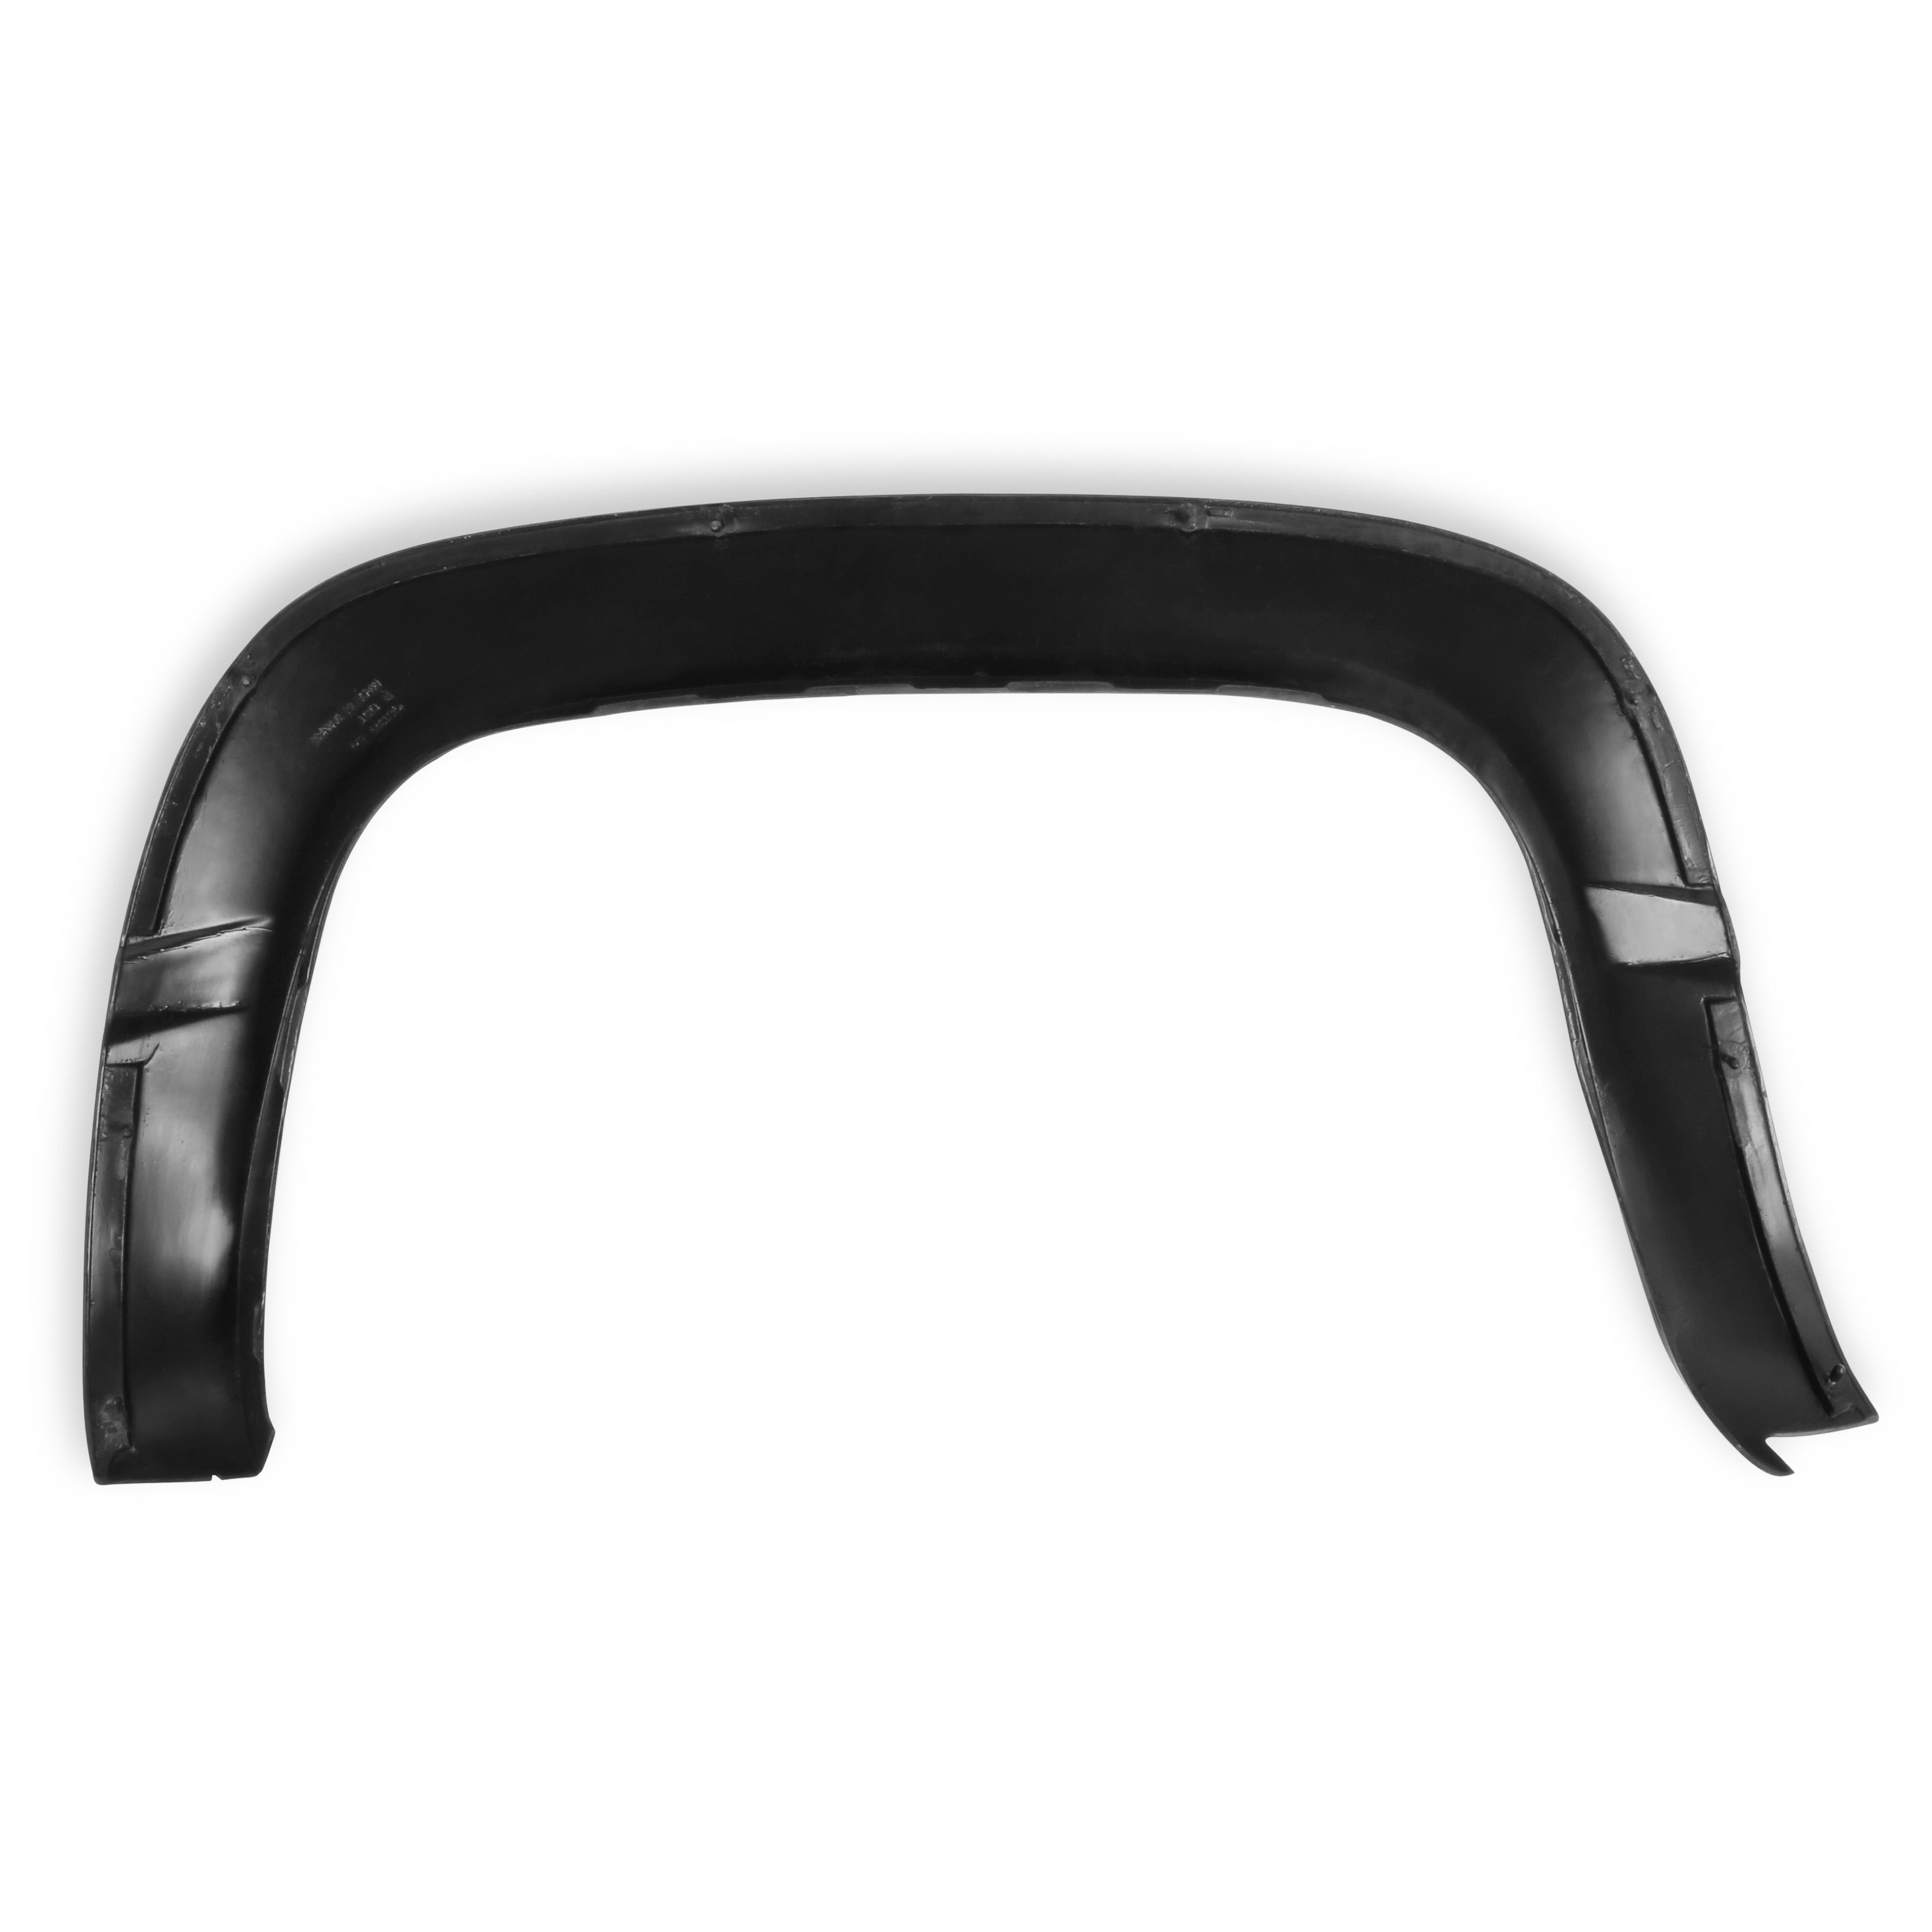 BROTHERS GMT400 Rear Fender Flare - RH pn 04-445